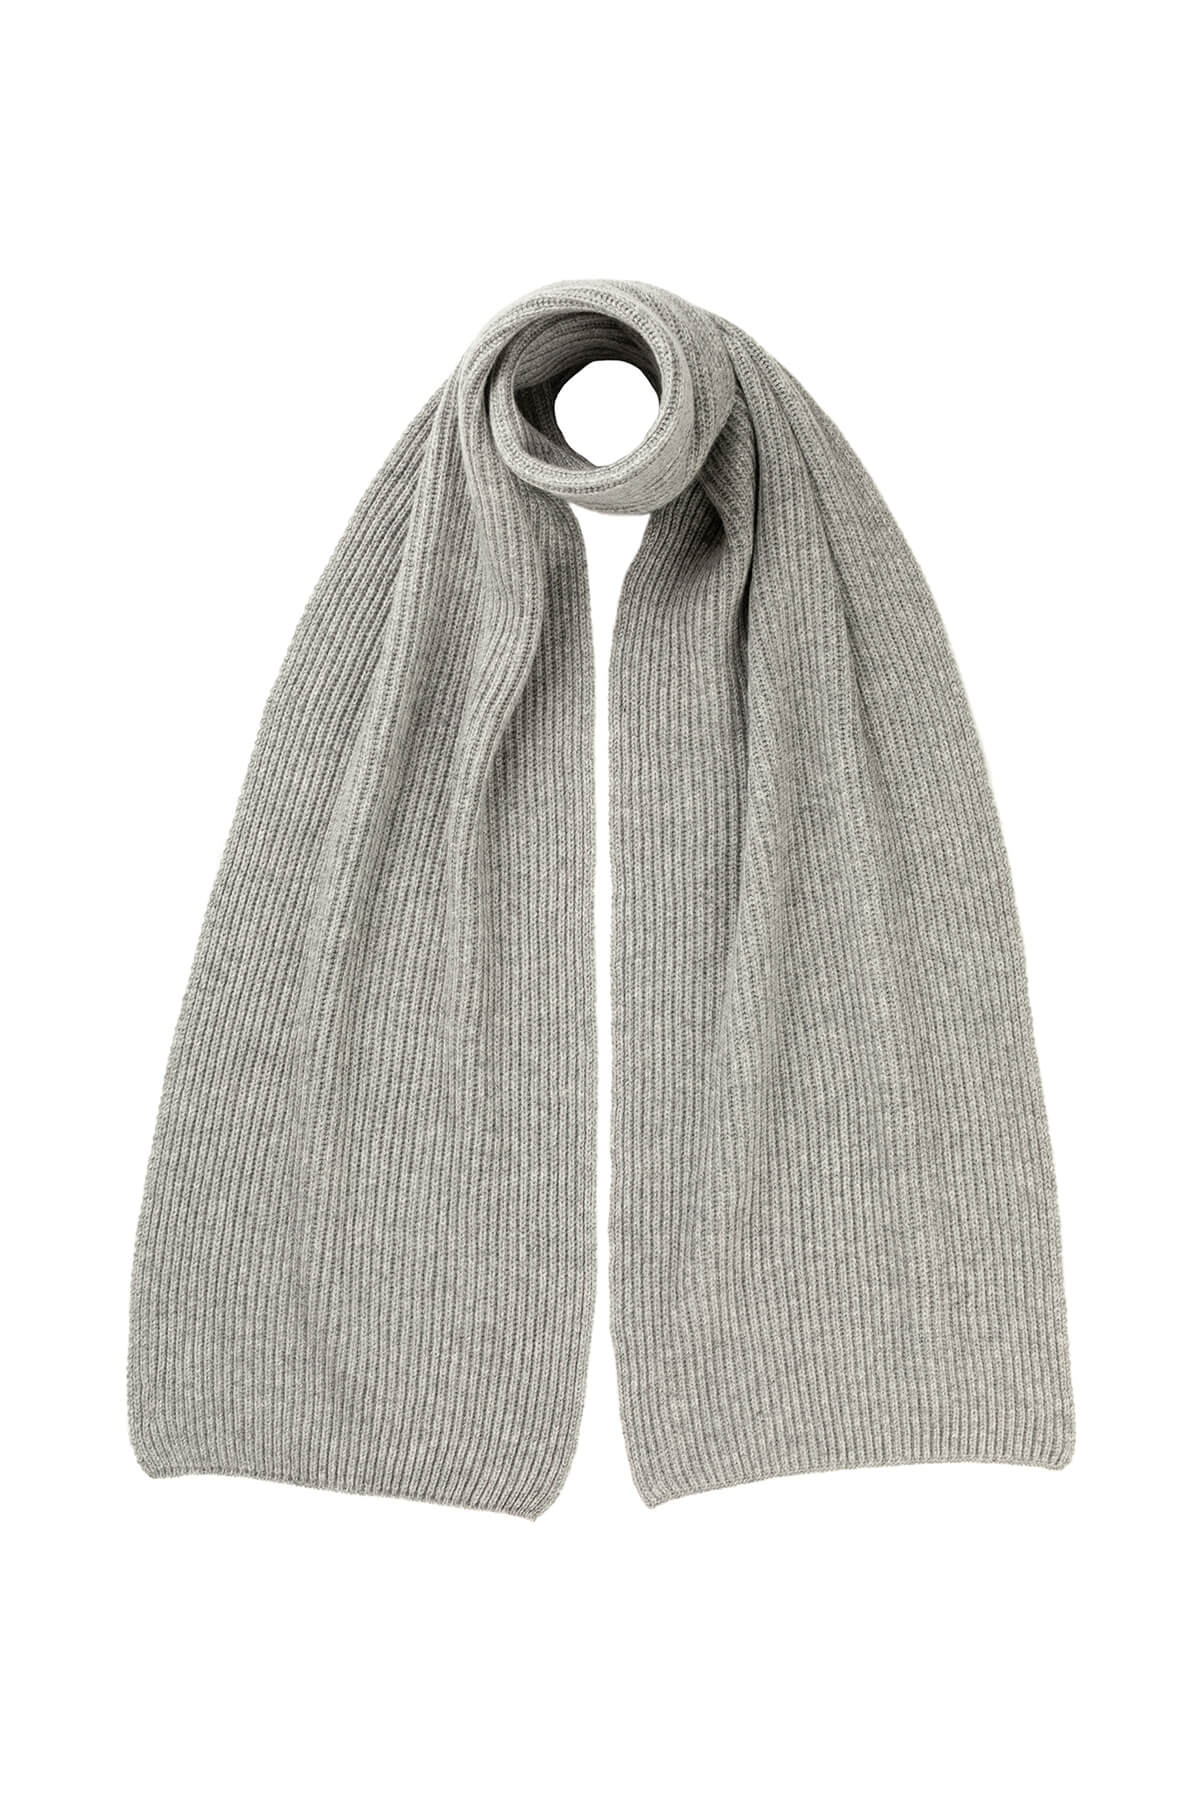 Johnstons of Elgin’s Ribbed Cashmere Scarf Giftset in Light Grey on a grey background AW23GIFTSET6C